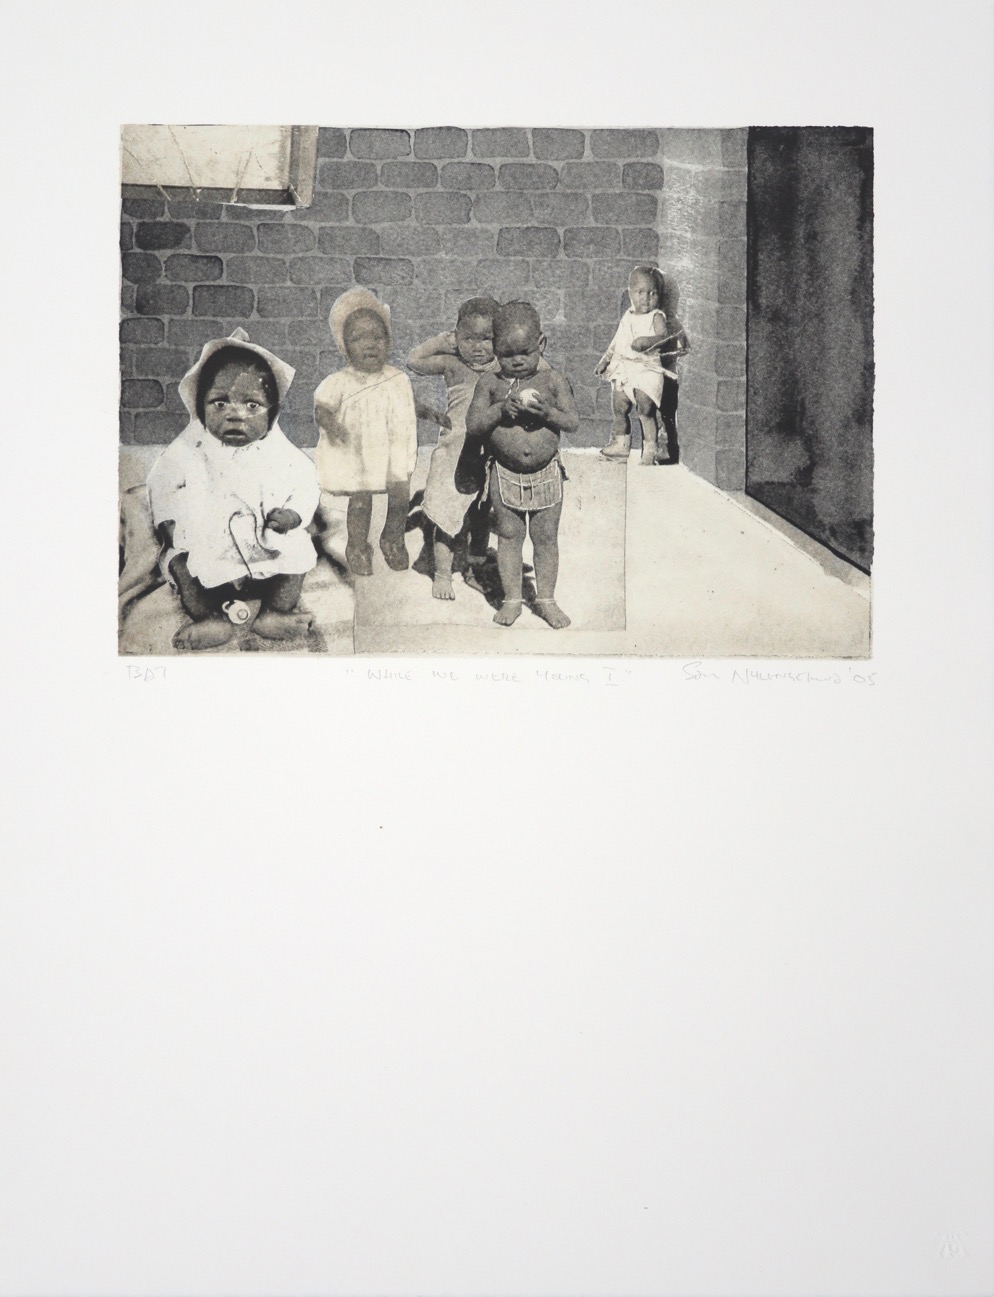 Collaged image of five babies and toddlers inside brick walled yard